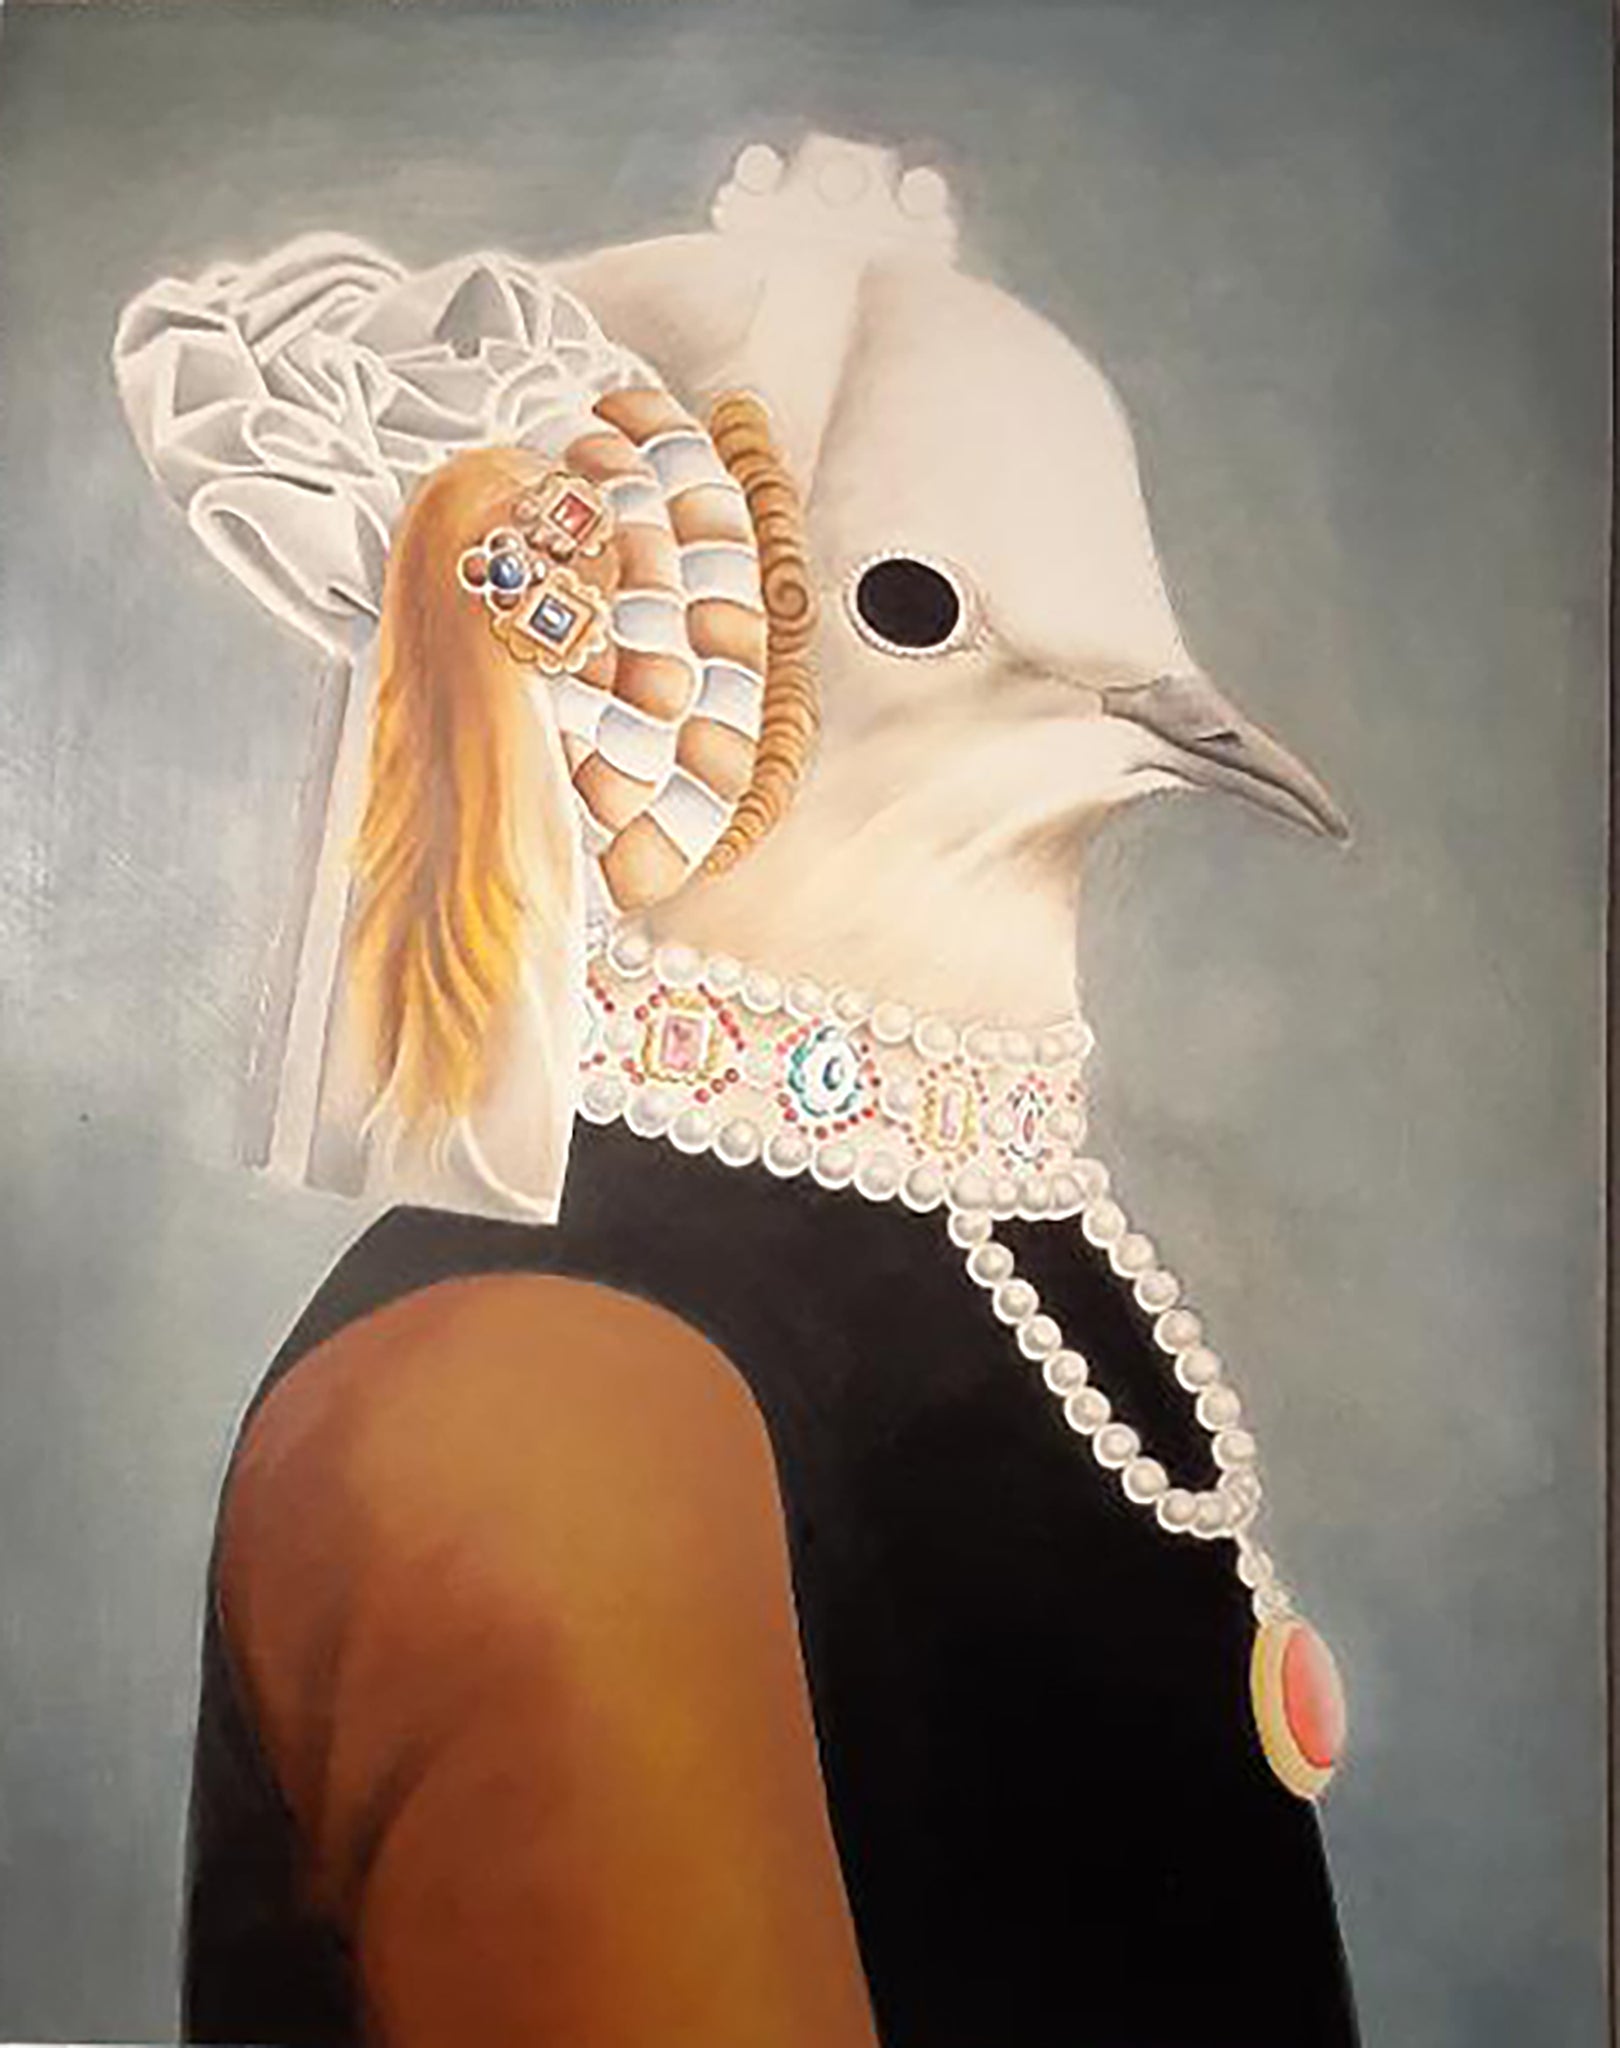 Amy Hill, "Bird in Profile" SOLD